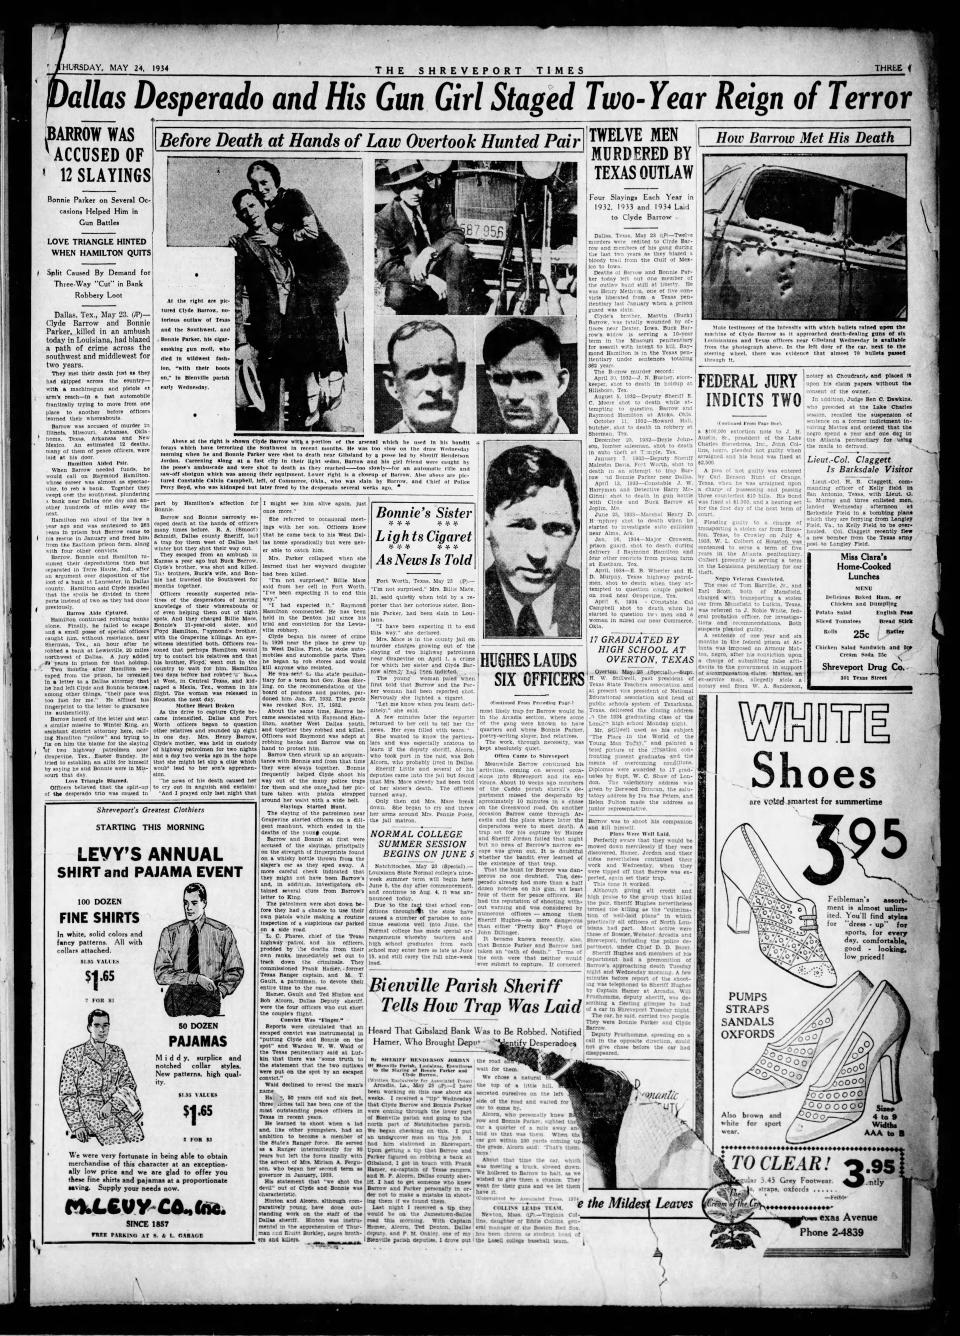 The May 24, 1934 edition of The Shreveport Times featuring the death of Bonnie and Clyde.